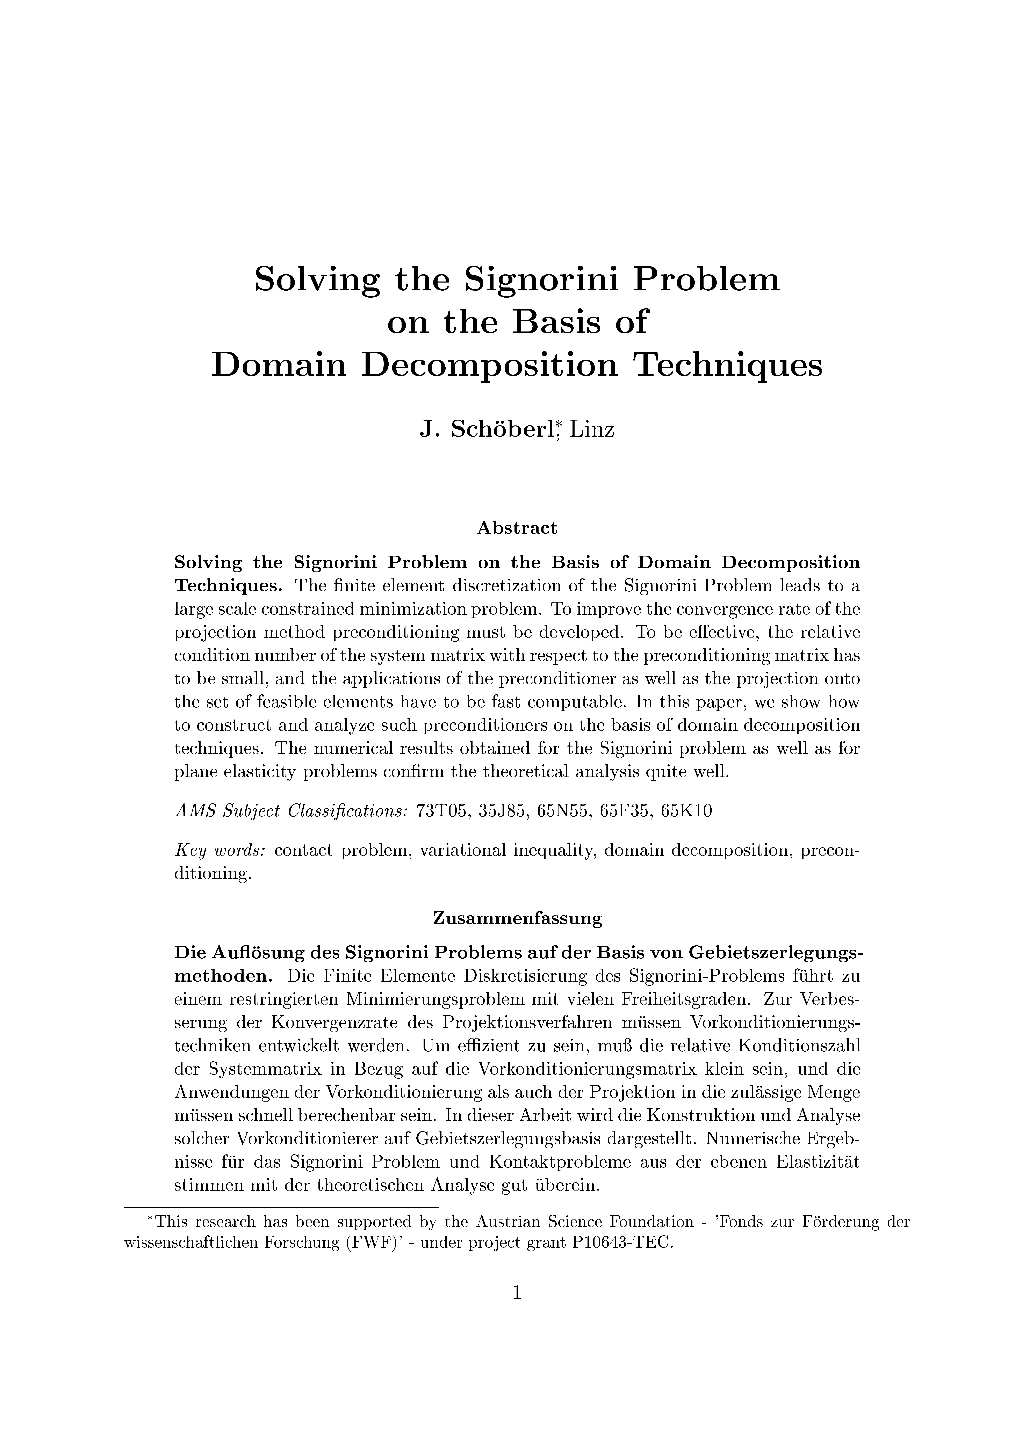 Solving the Signorini Problem on the Basis of Domain Decomposition